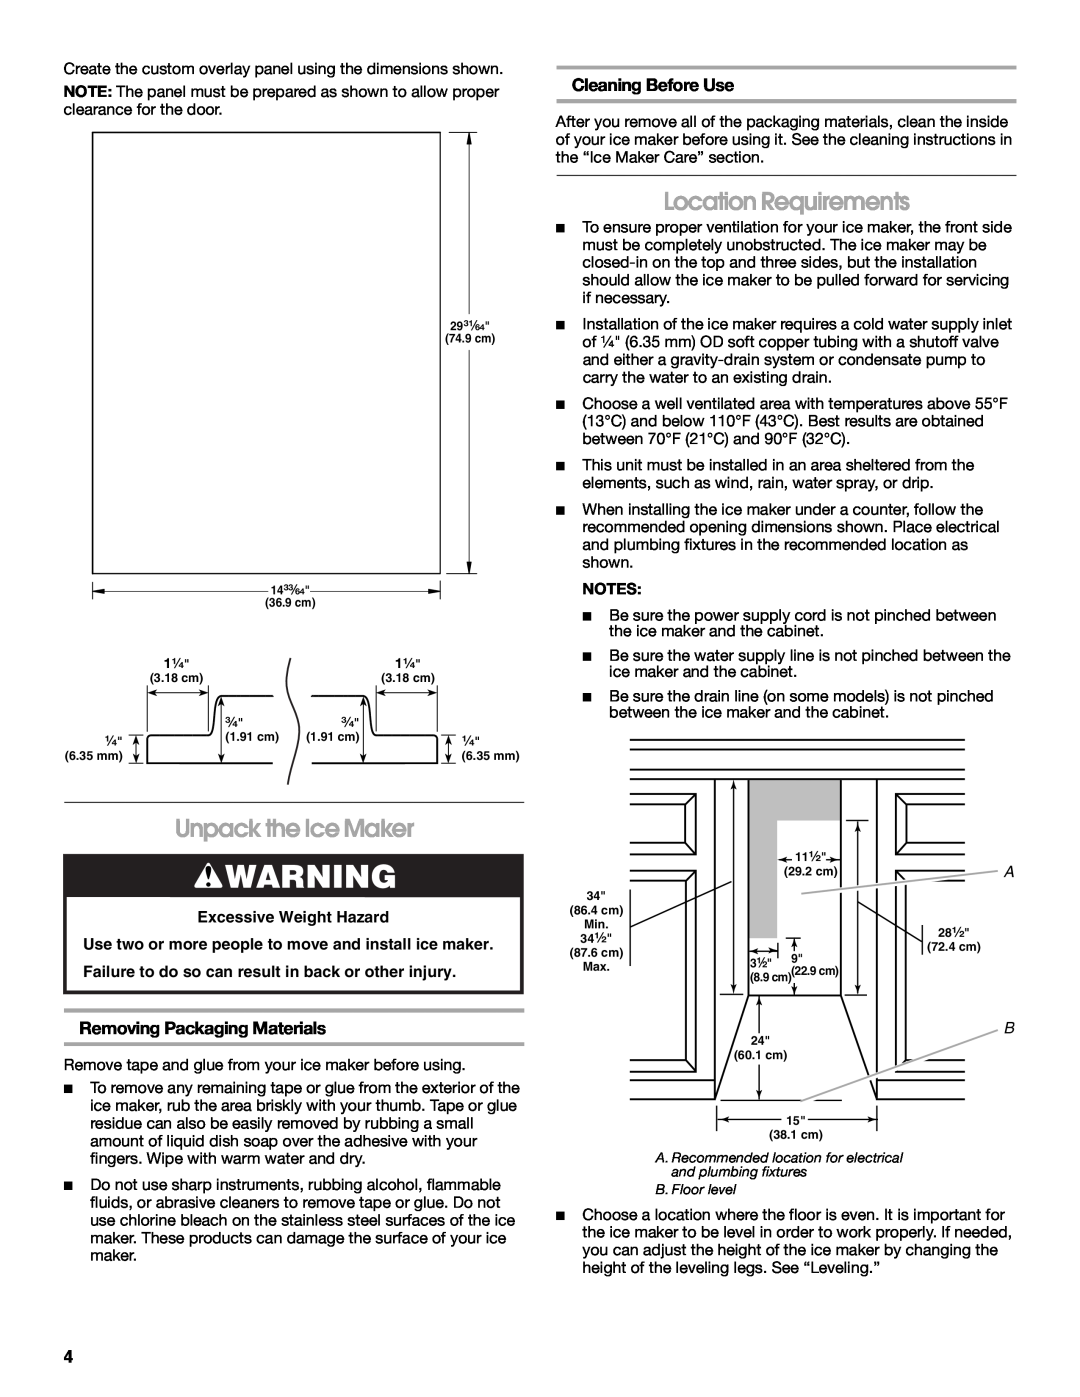 Jenn-Air W10136129C manual Location Requirements, Unpack the Ice Maker, Cleaning Before Use, Removing Packaging Materials 